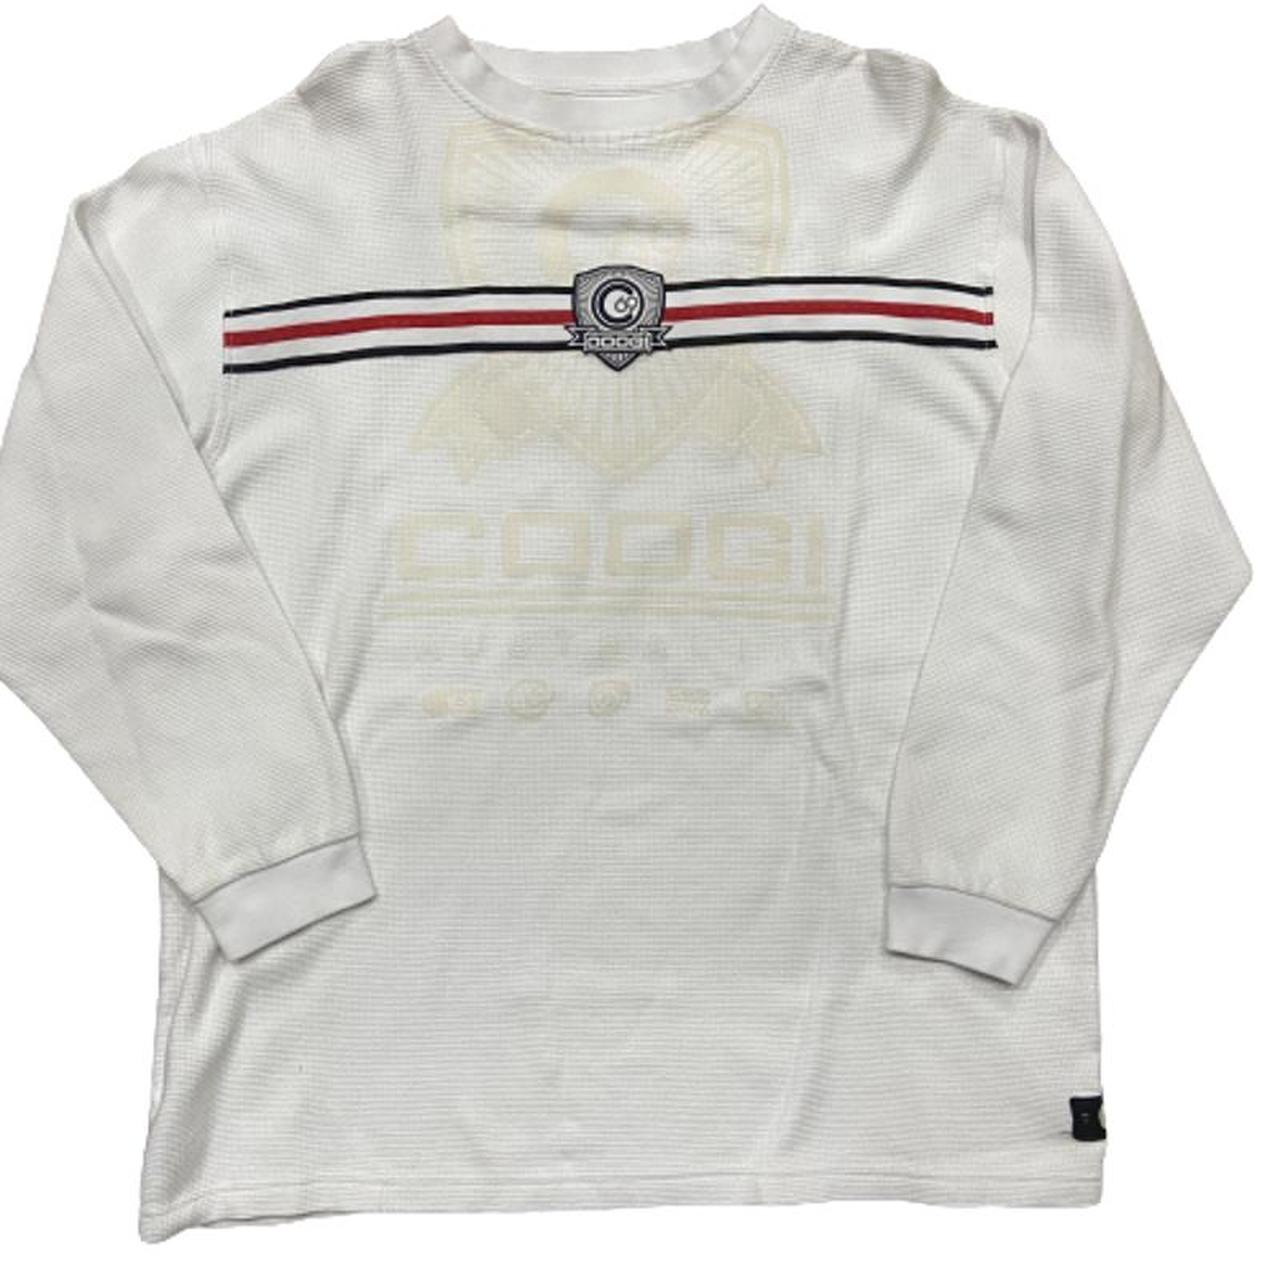 Coogi Men's White and Red Jumper